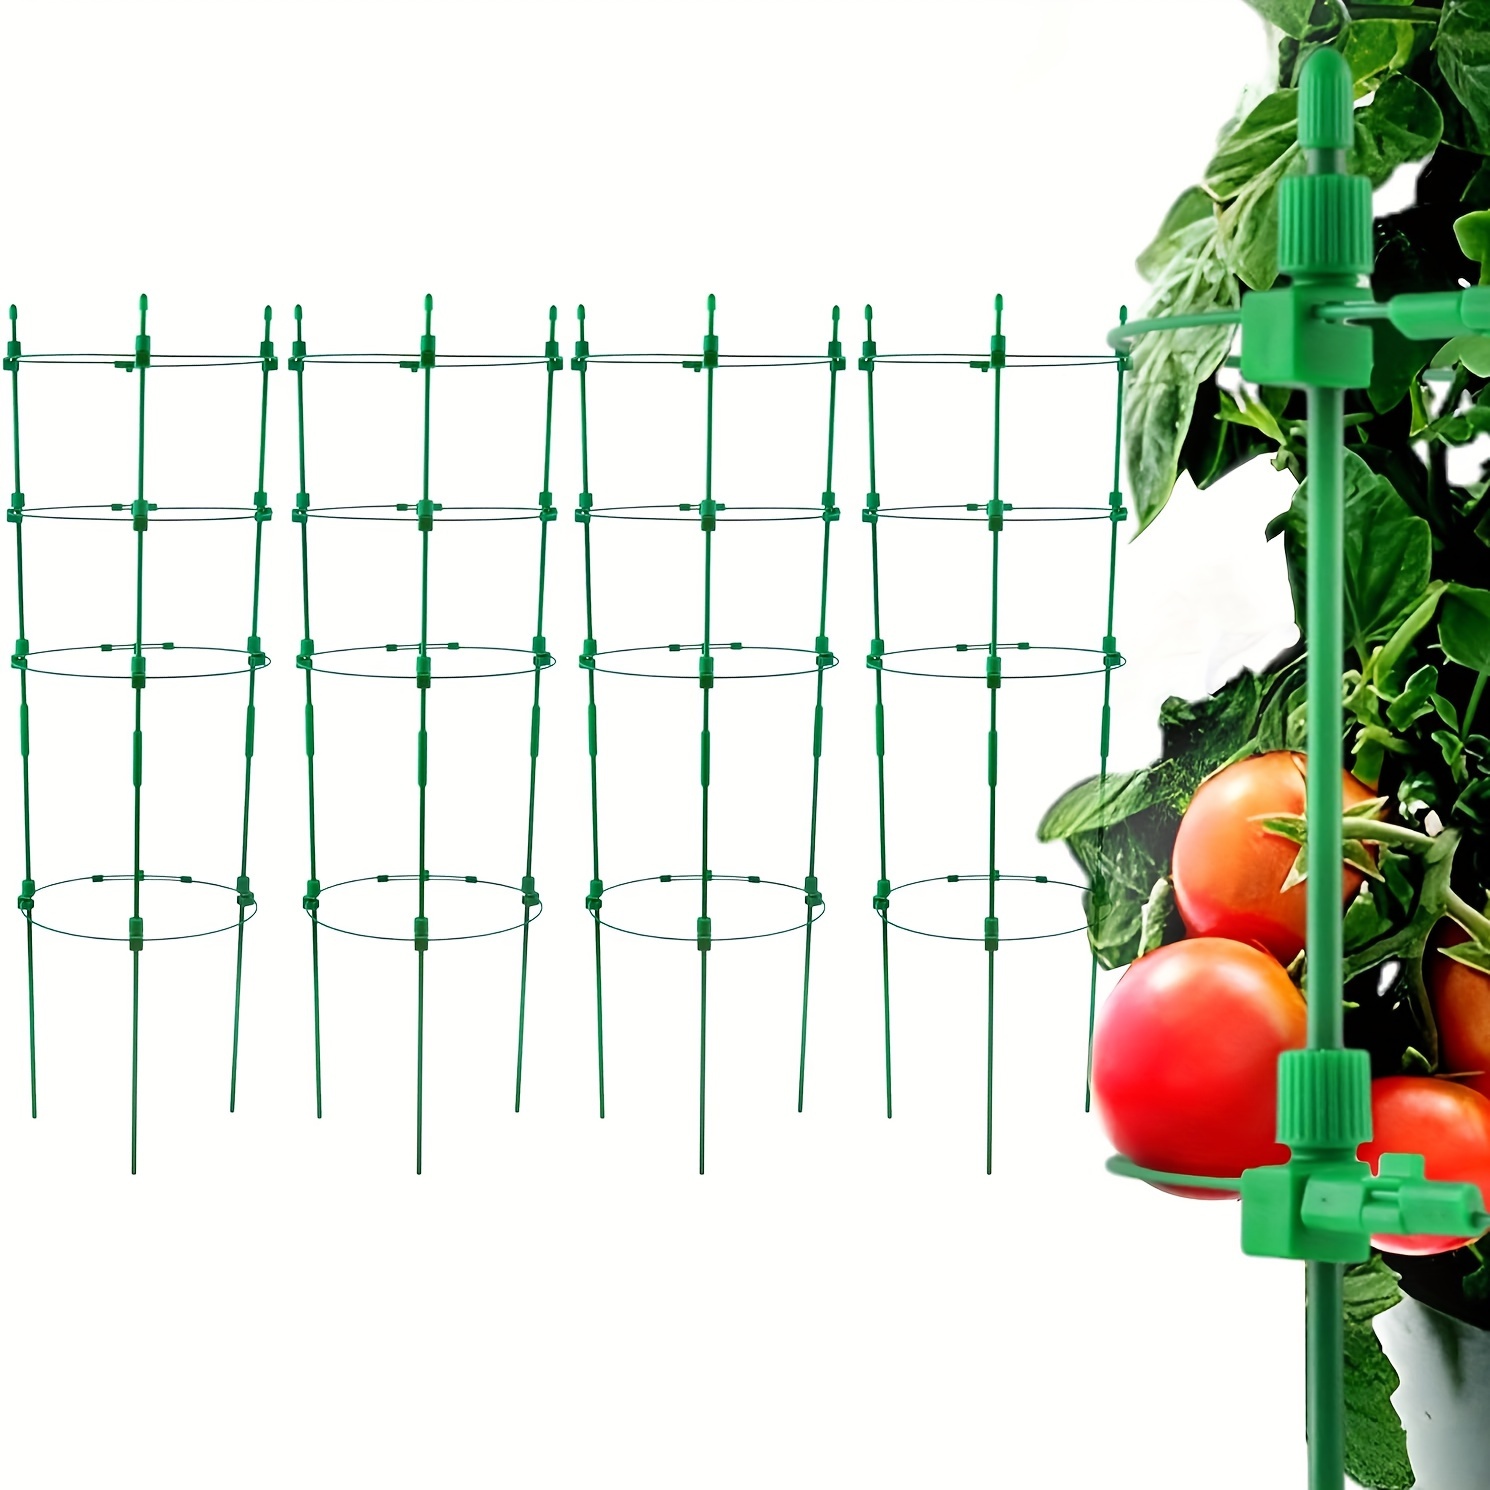 

New Upgraded Garden Tomato Rack 4-piece Set Of 36 Inch Tomato Plant Support Cage, Tomato Pile Grid Rack Suitable For Climbing Plants, Cherries, Tomatoes, Peonies, Flowers, With Adjustable Rings